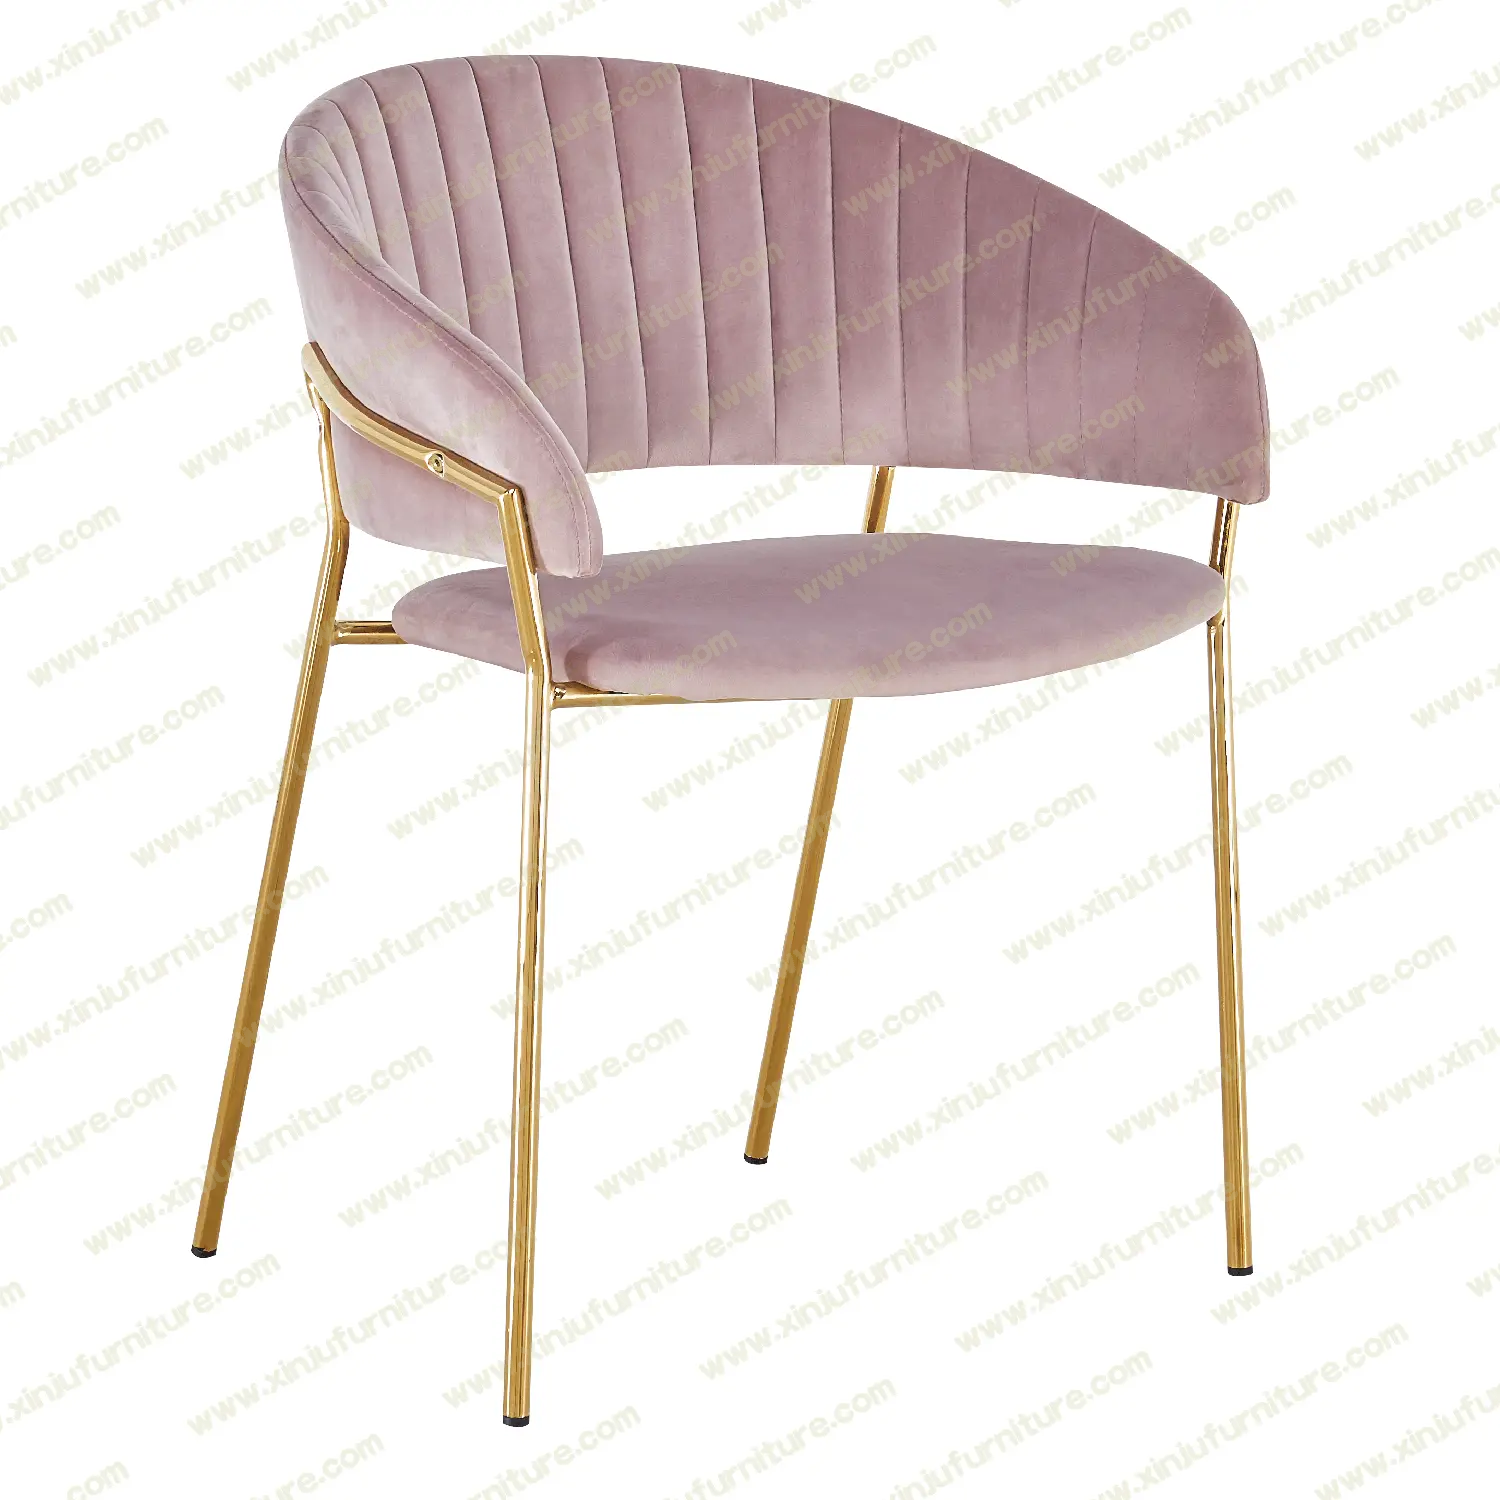 Simple modern pink dining chair